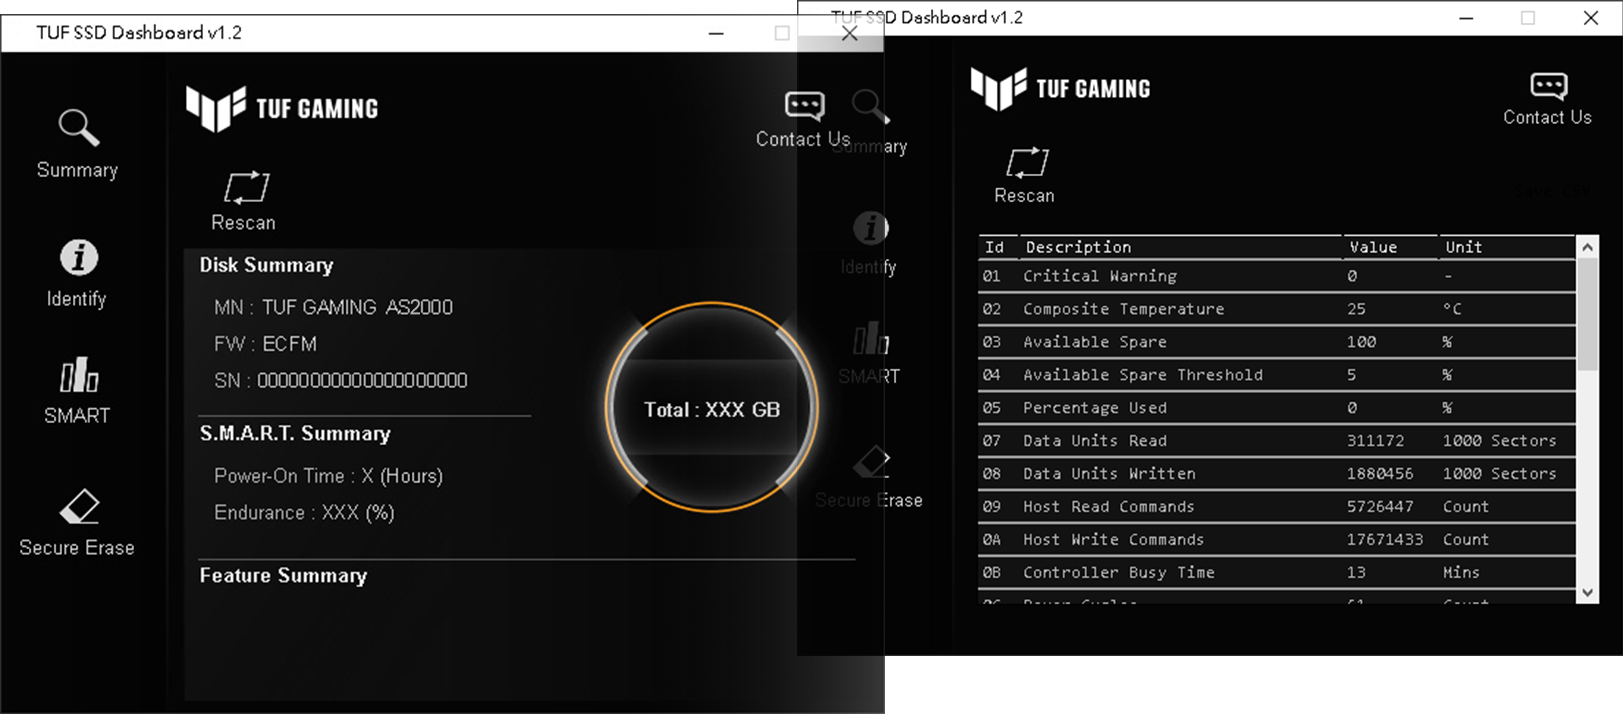 TUF Gaming AS2000 SSD Dashboard user interfaces